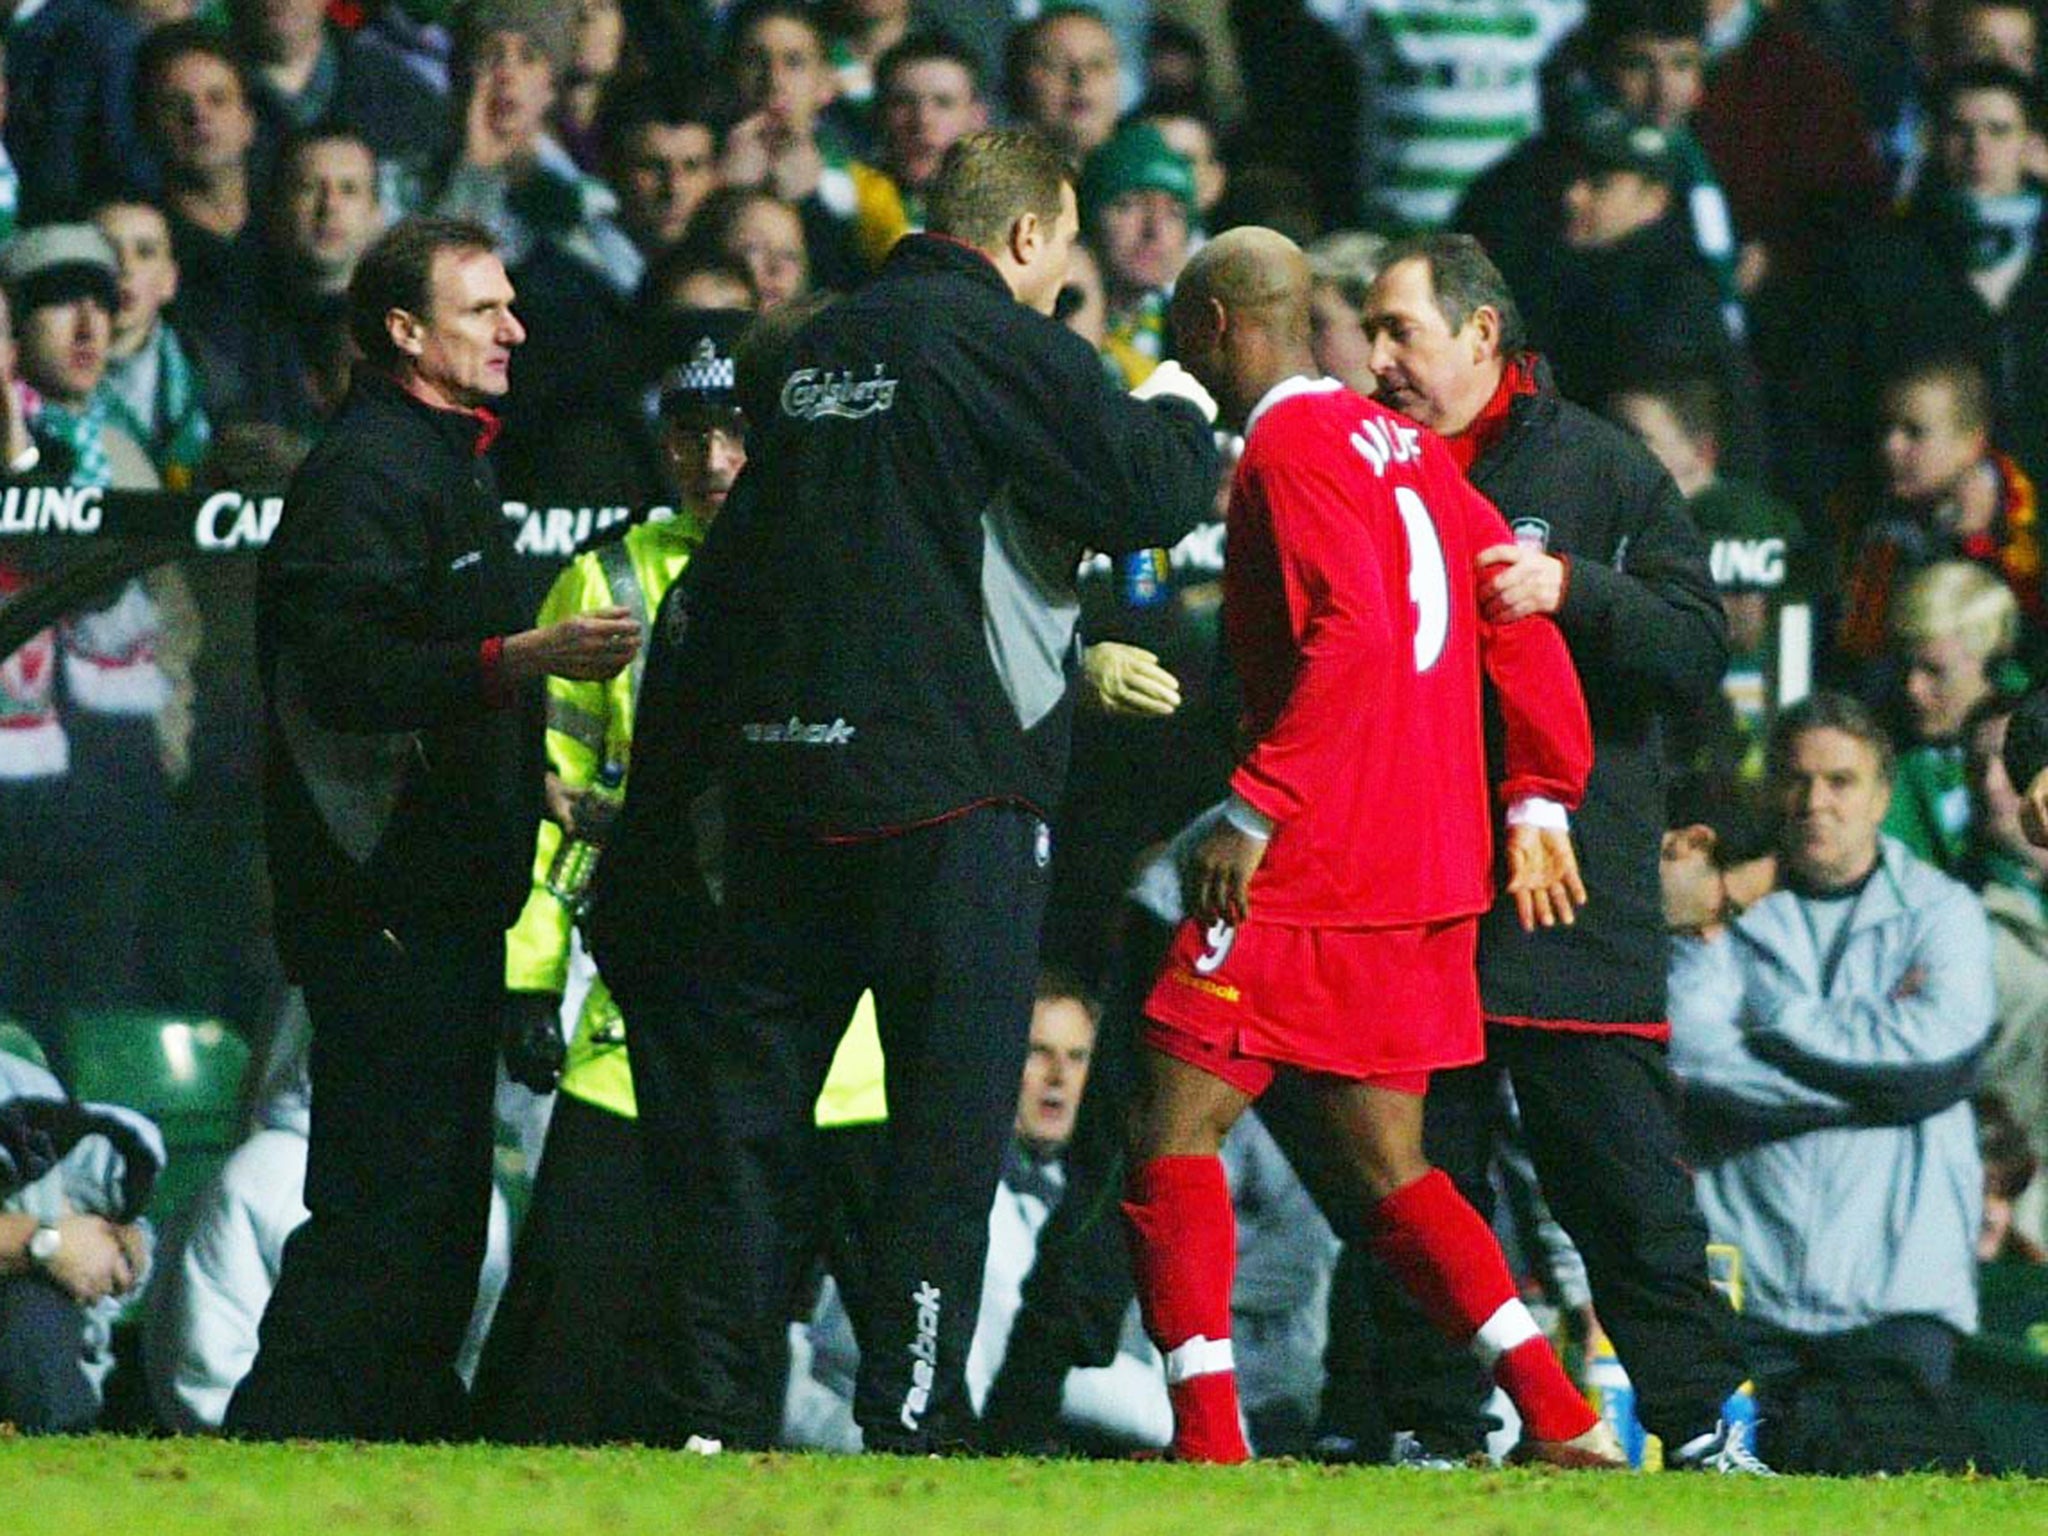 The first of two appearances on the list by the controversial Senegalese winger, Diouf was banned for two games and fined by both Glasgow Crown Court and his club Liverpool after spitting at Celtic fans during their UEFA Cup quarter-final clash. Diouf wou